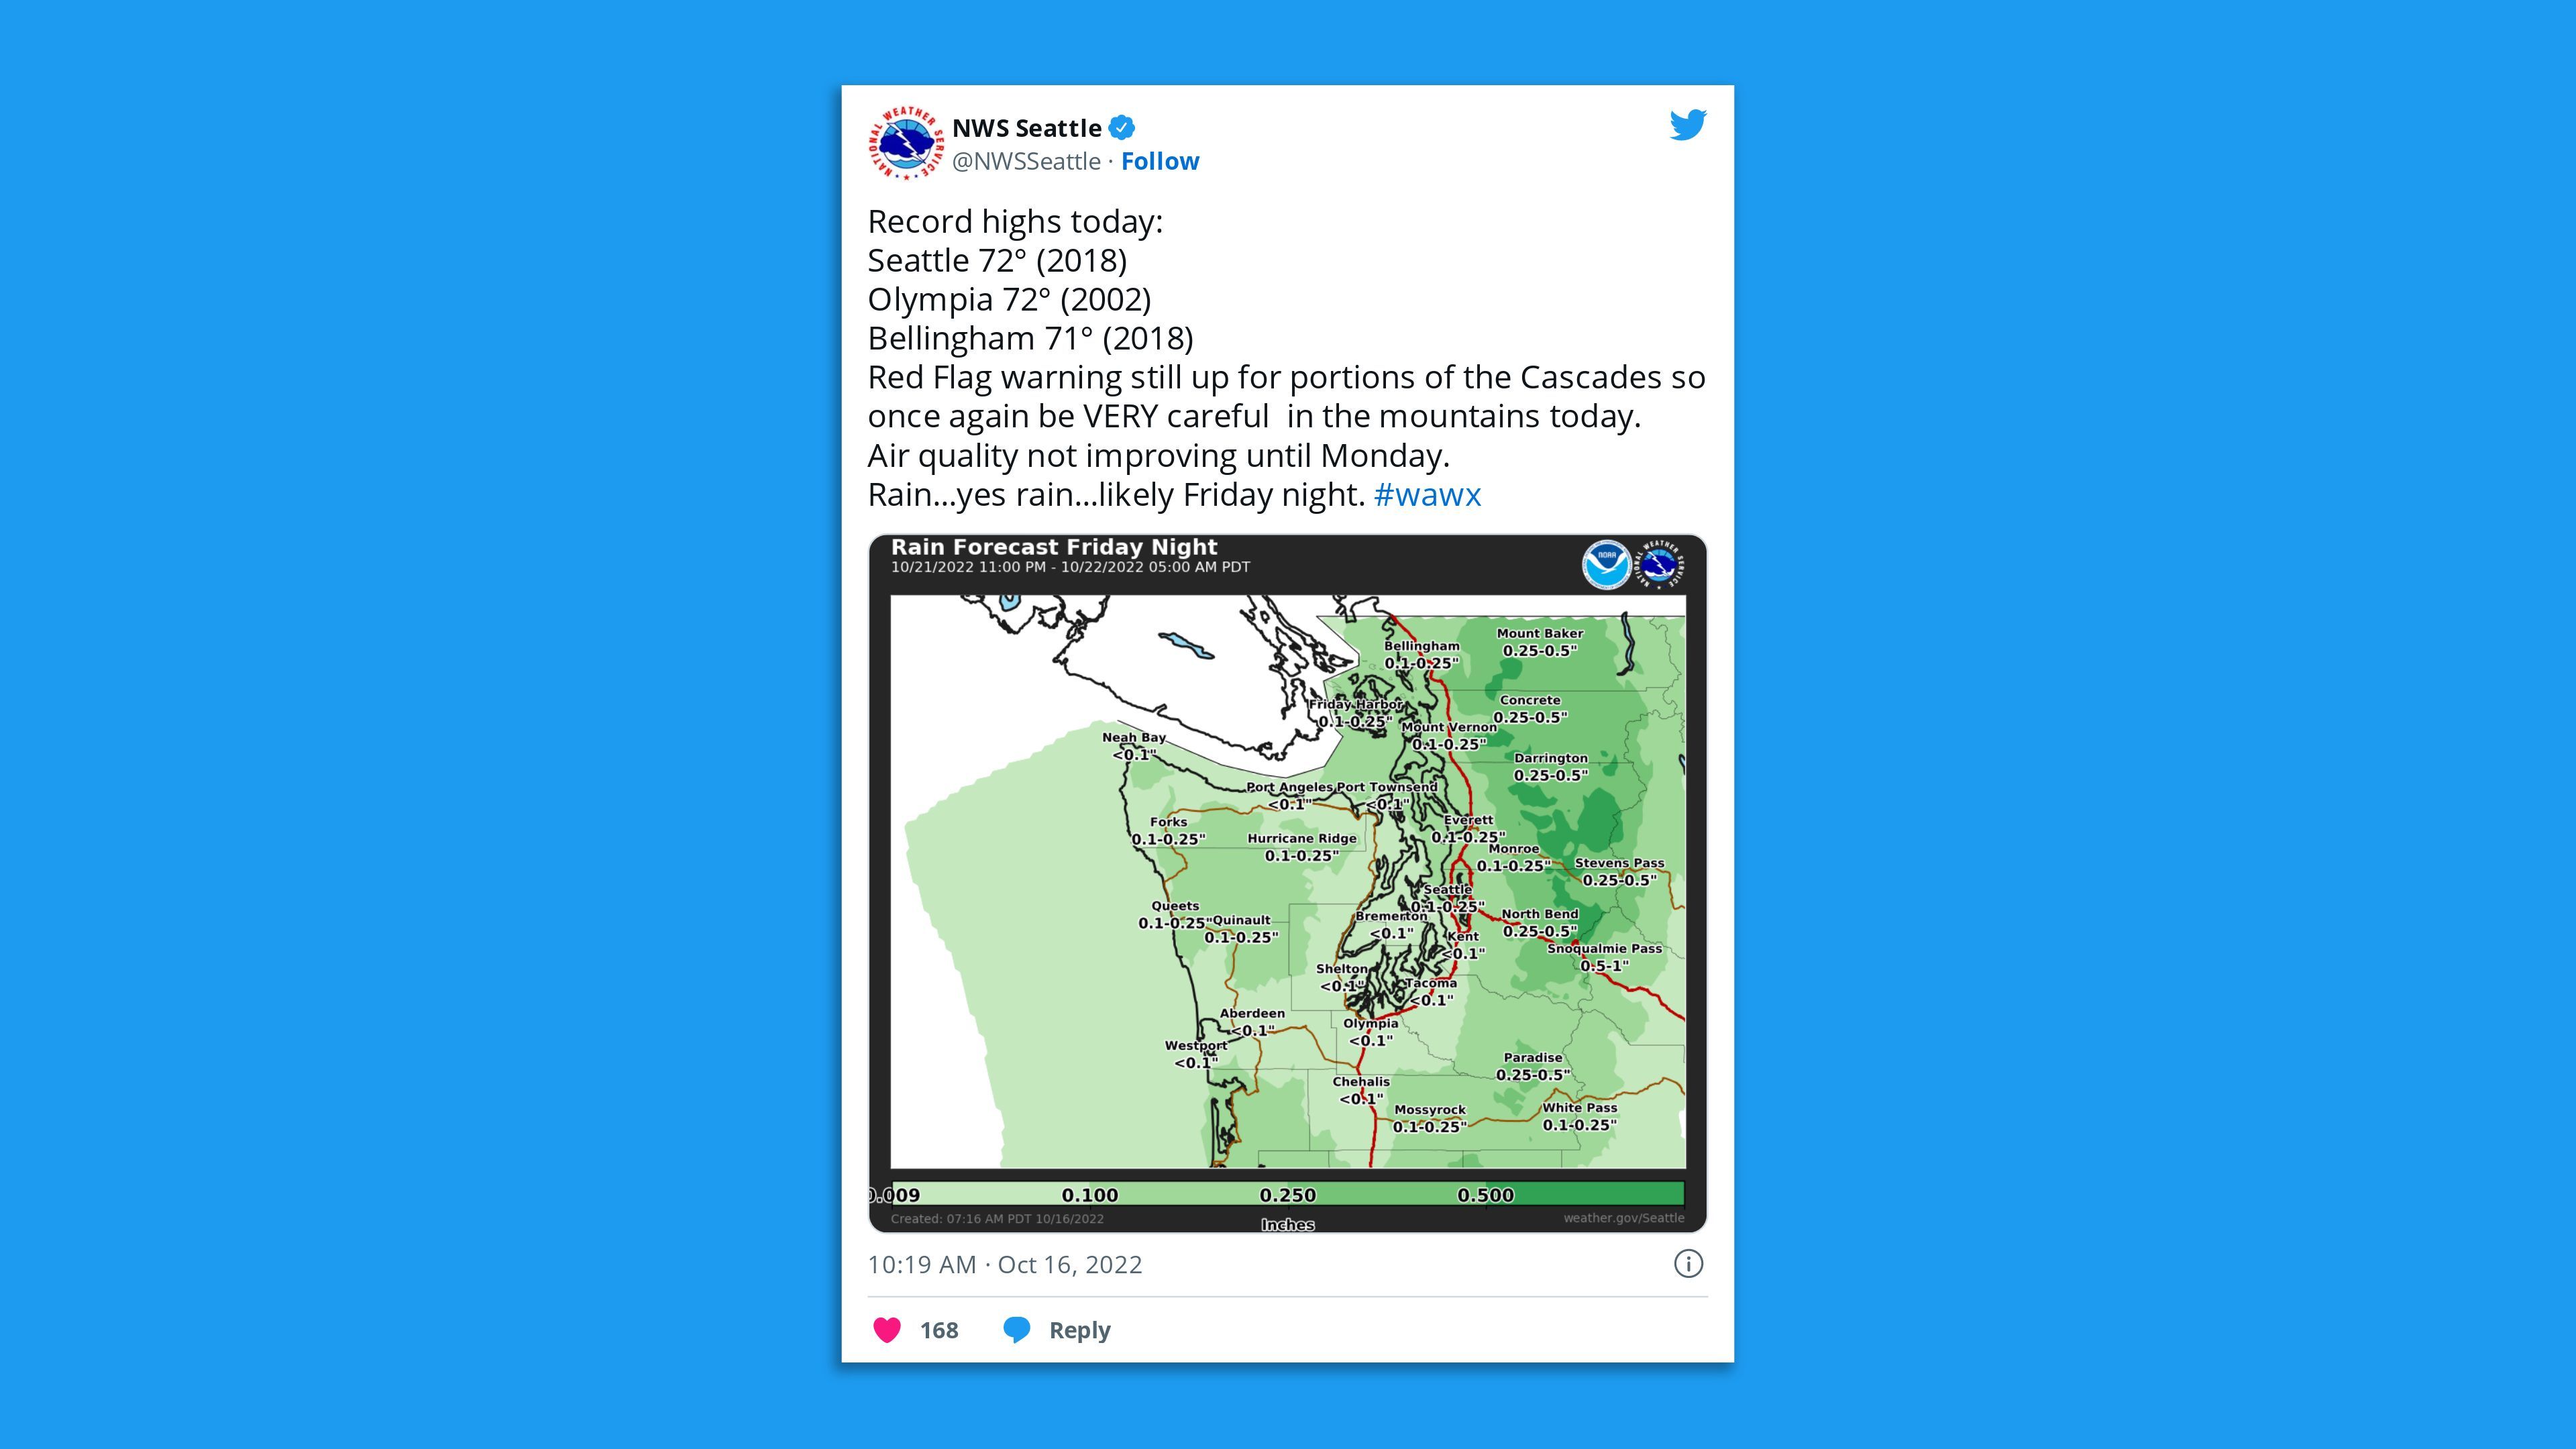 The NWS tweeted about record high temperatures in Washington state, including 72F in Seattle.